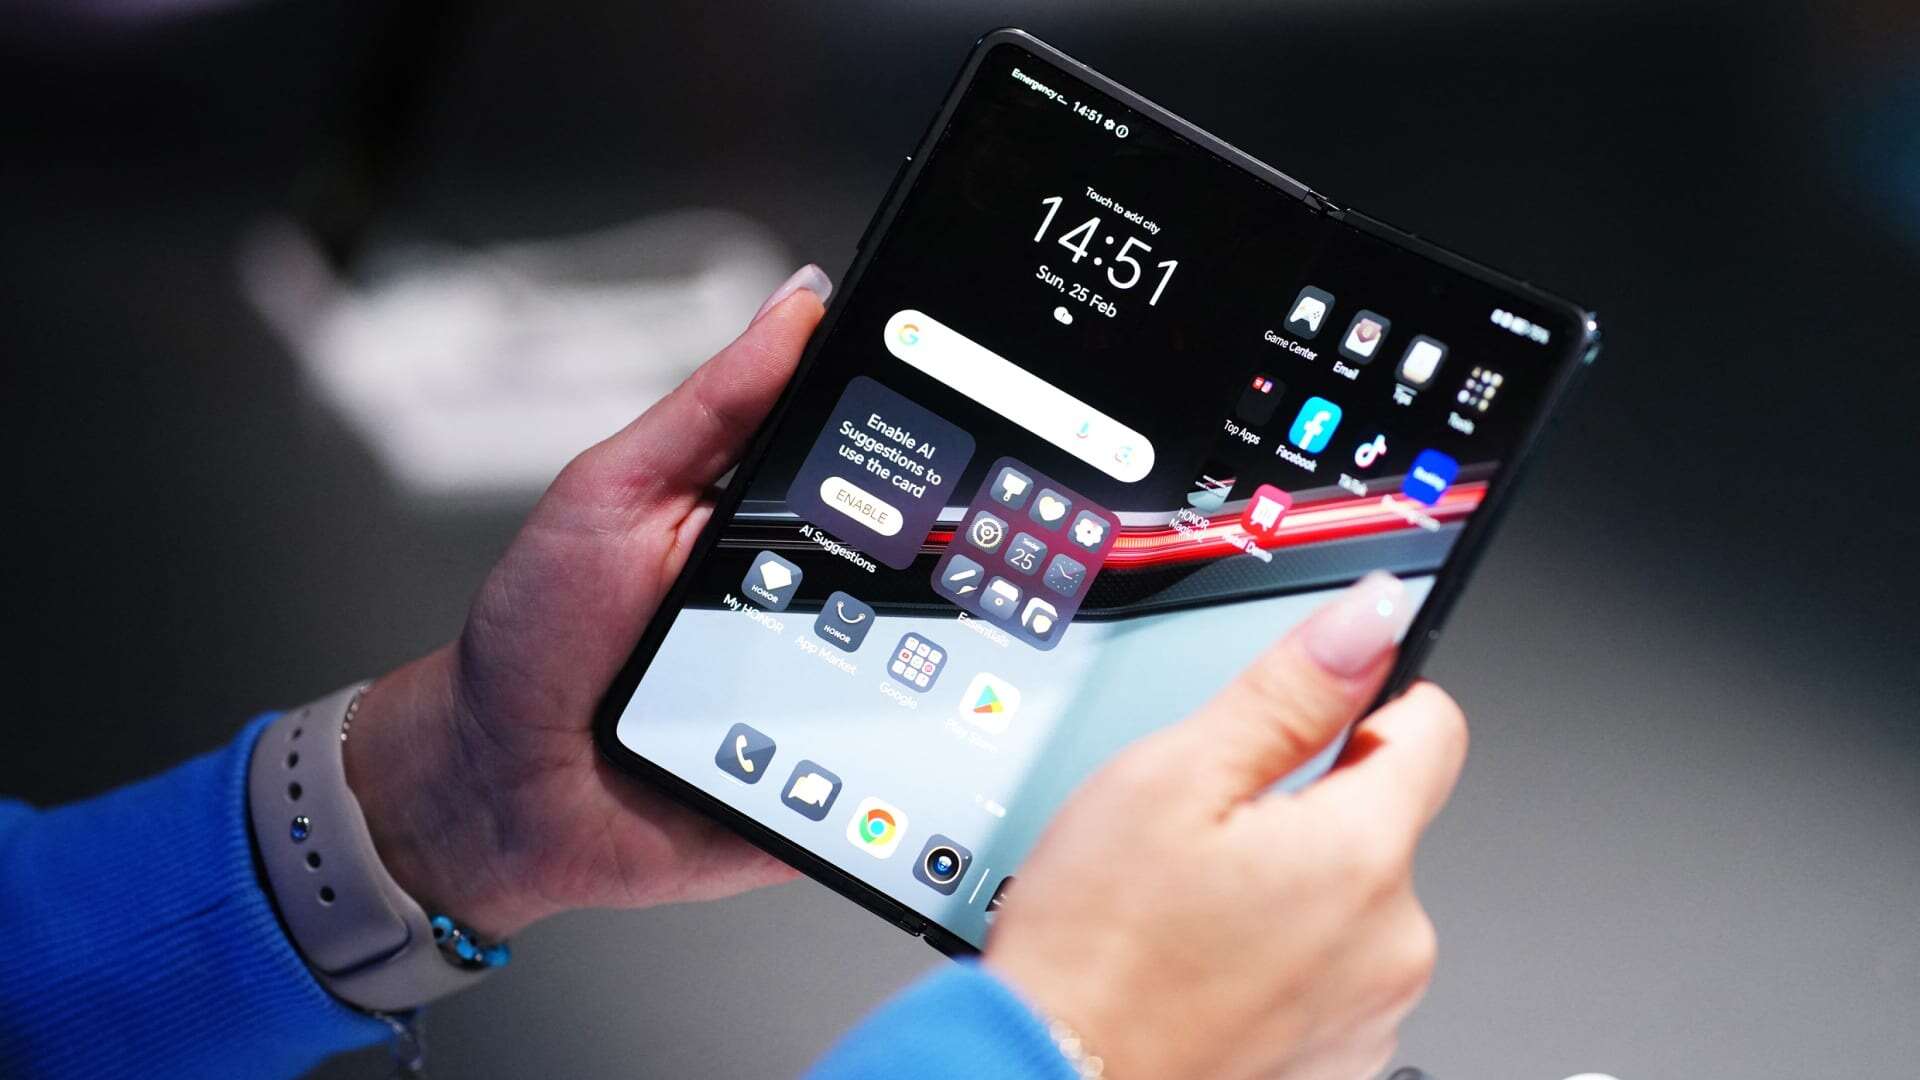 A new kind of battery could take foldable phones mainstream